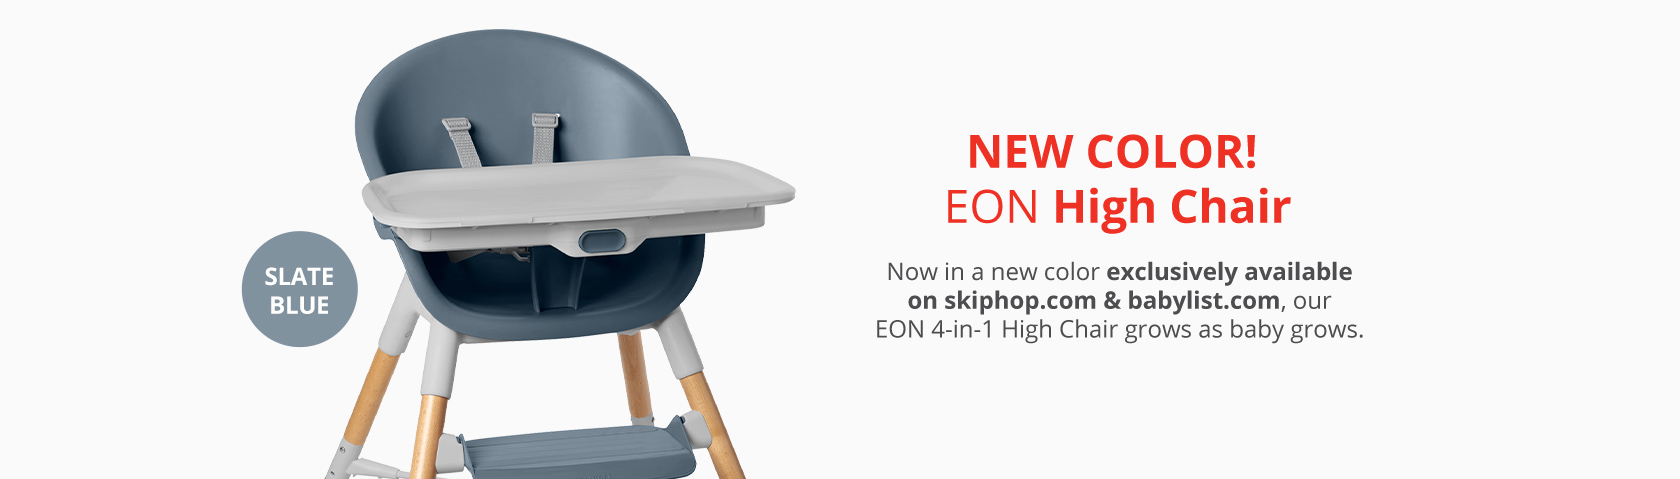 New Color! Eon High Chair | Now in a new color exclusively avaiable on skiphop.com & babylist.com.